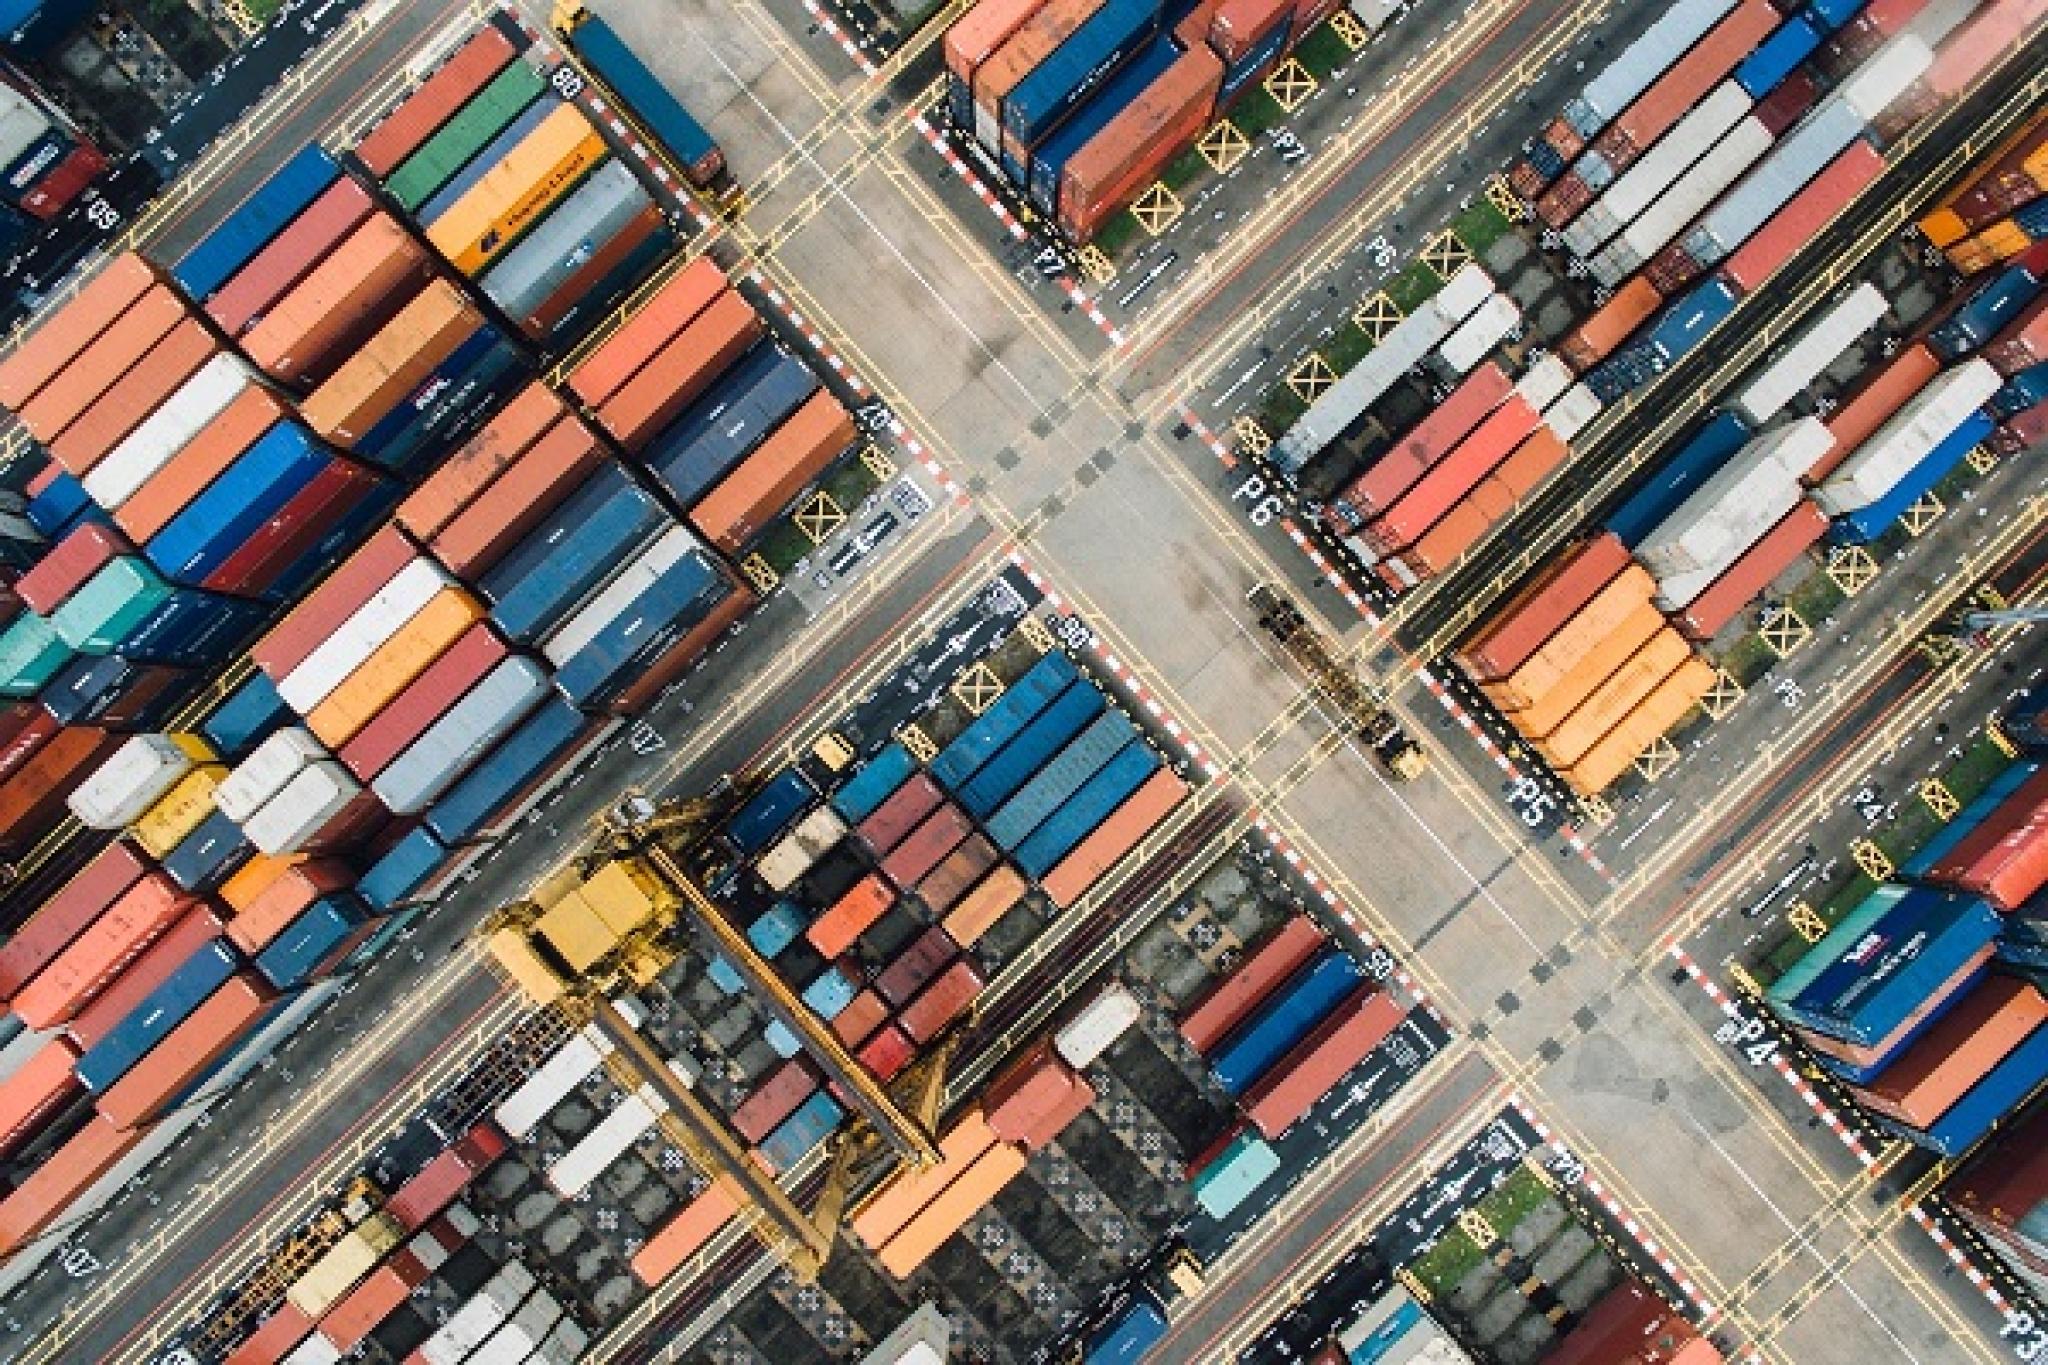 Aerial view of orderly shipping containers https://www.maxpixel.net/photo-2568204 (CC0) https://creativecommons.org/publicdomain/zero/1.0/